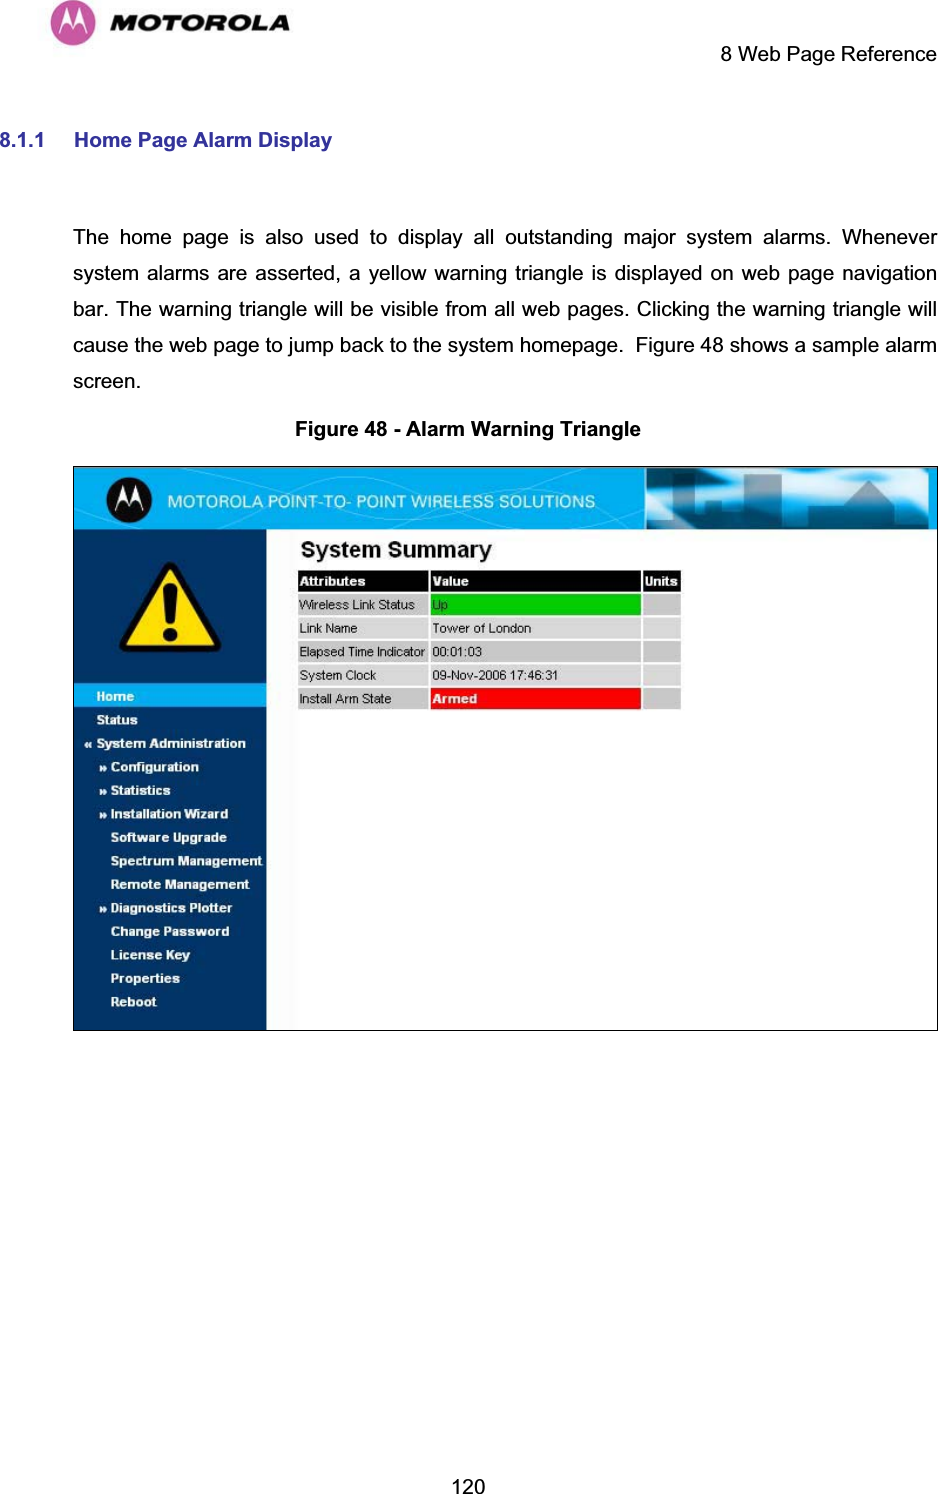     8 Web Page Reference  1208.1.1 Home Page Alarm Display  The home page is also used to display all outstanding major system alarms. Whenever system alarms are asserted, a yellow warning triangle is displayed on web page navigation bar. The warning triangle will be visible from all web pages. Clicking the warning triangle will cause the web page to jump back to the system homepage.  Figure 48 shows a sample alarm screen. Figure 48 - Alarm Warning Triangle   